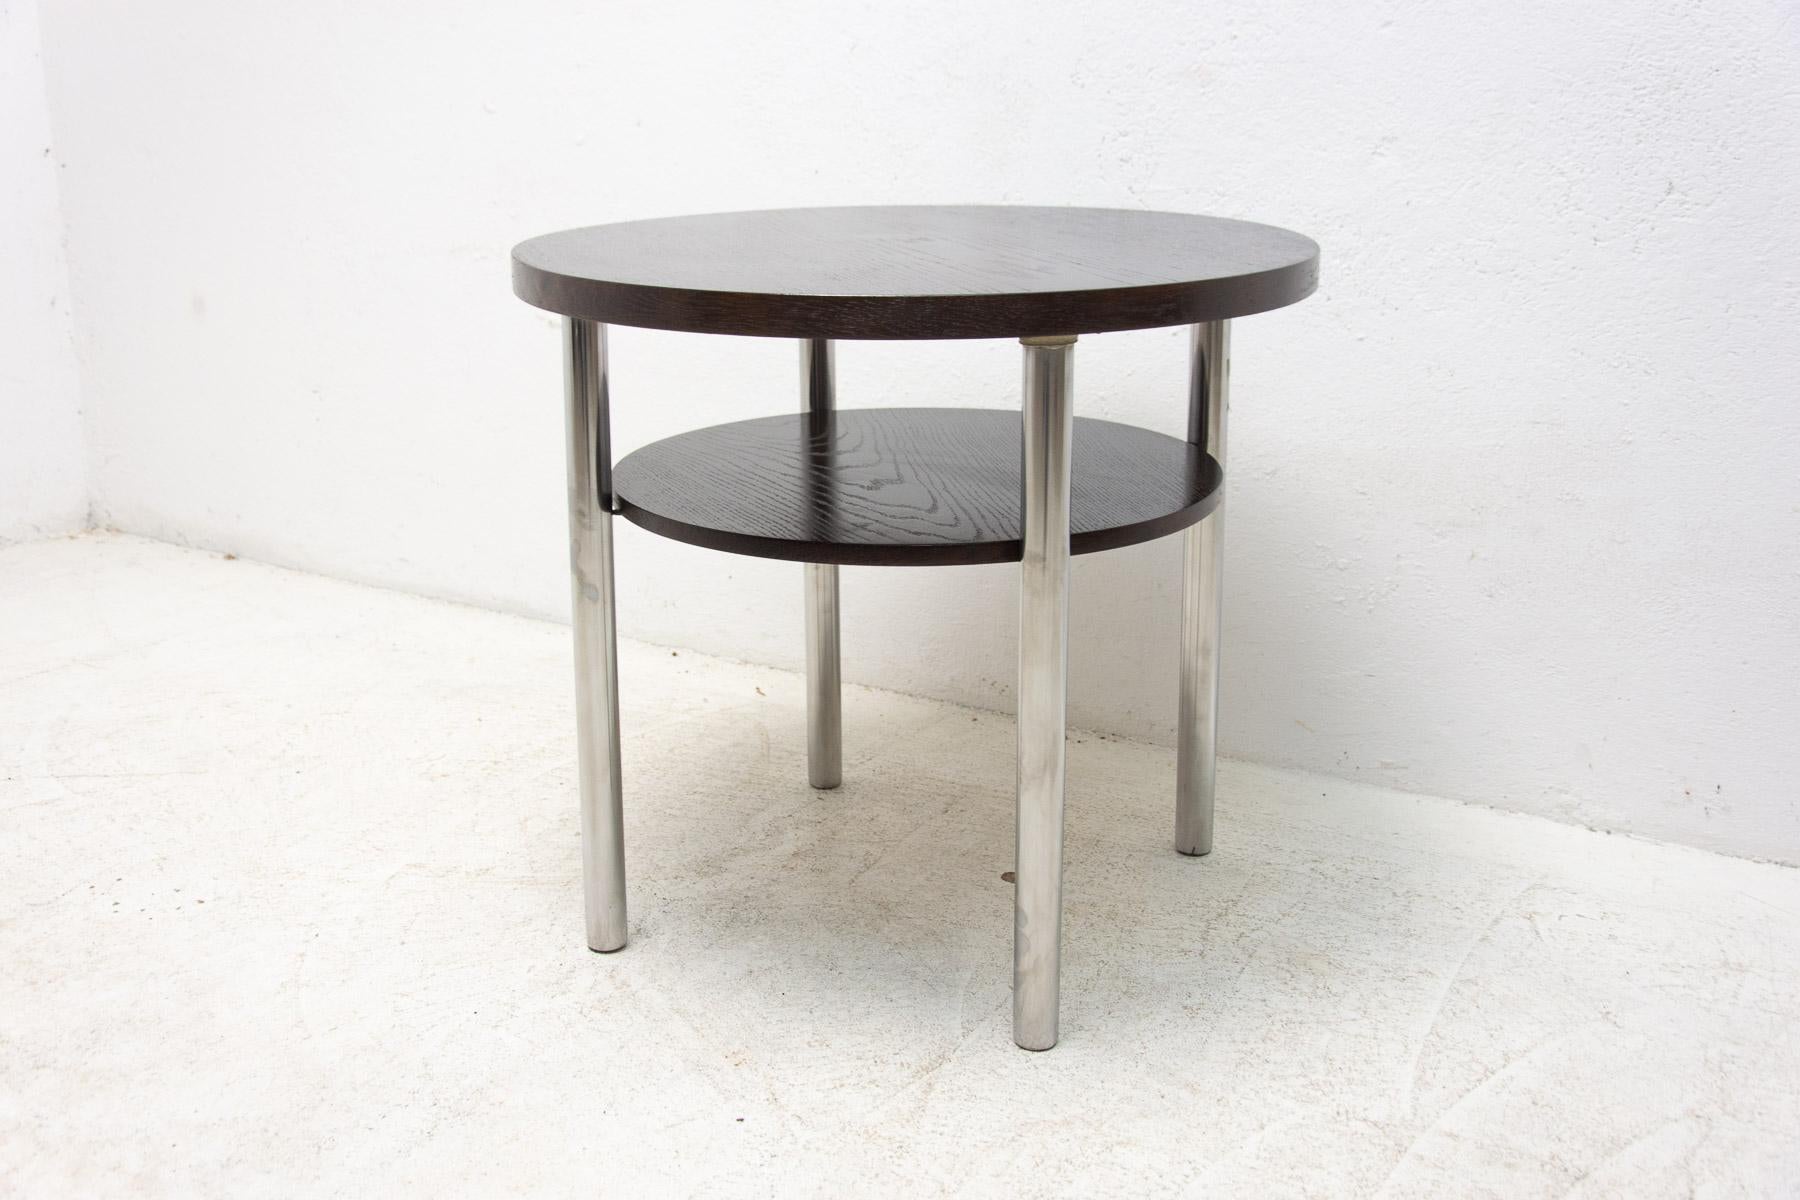 This coffee table was designed by Robert Slezák in the 1930´s and made in the former Czechoslovakia in the 1950s by the famous company Kovona. The table features a chrome-plated metal base and dark stained oak wood plates. Chrome structure is in